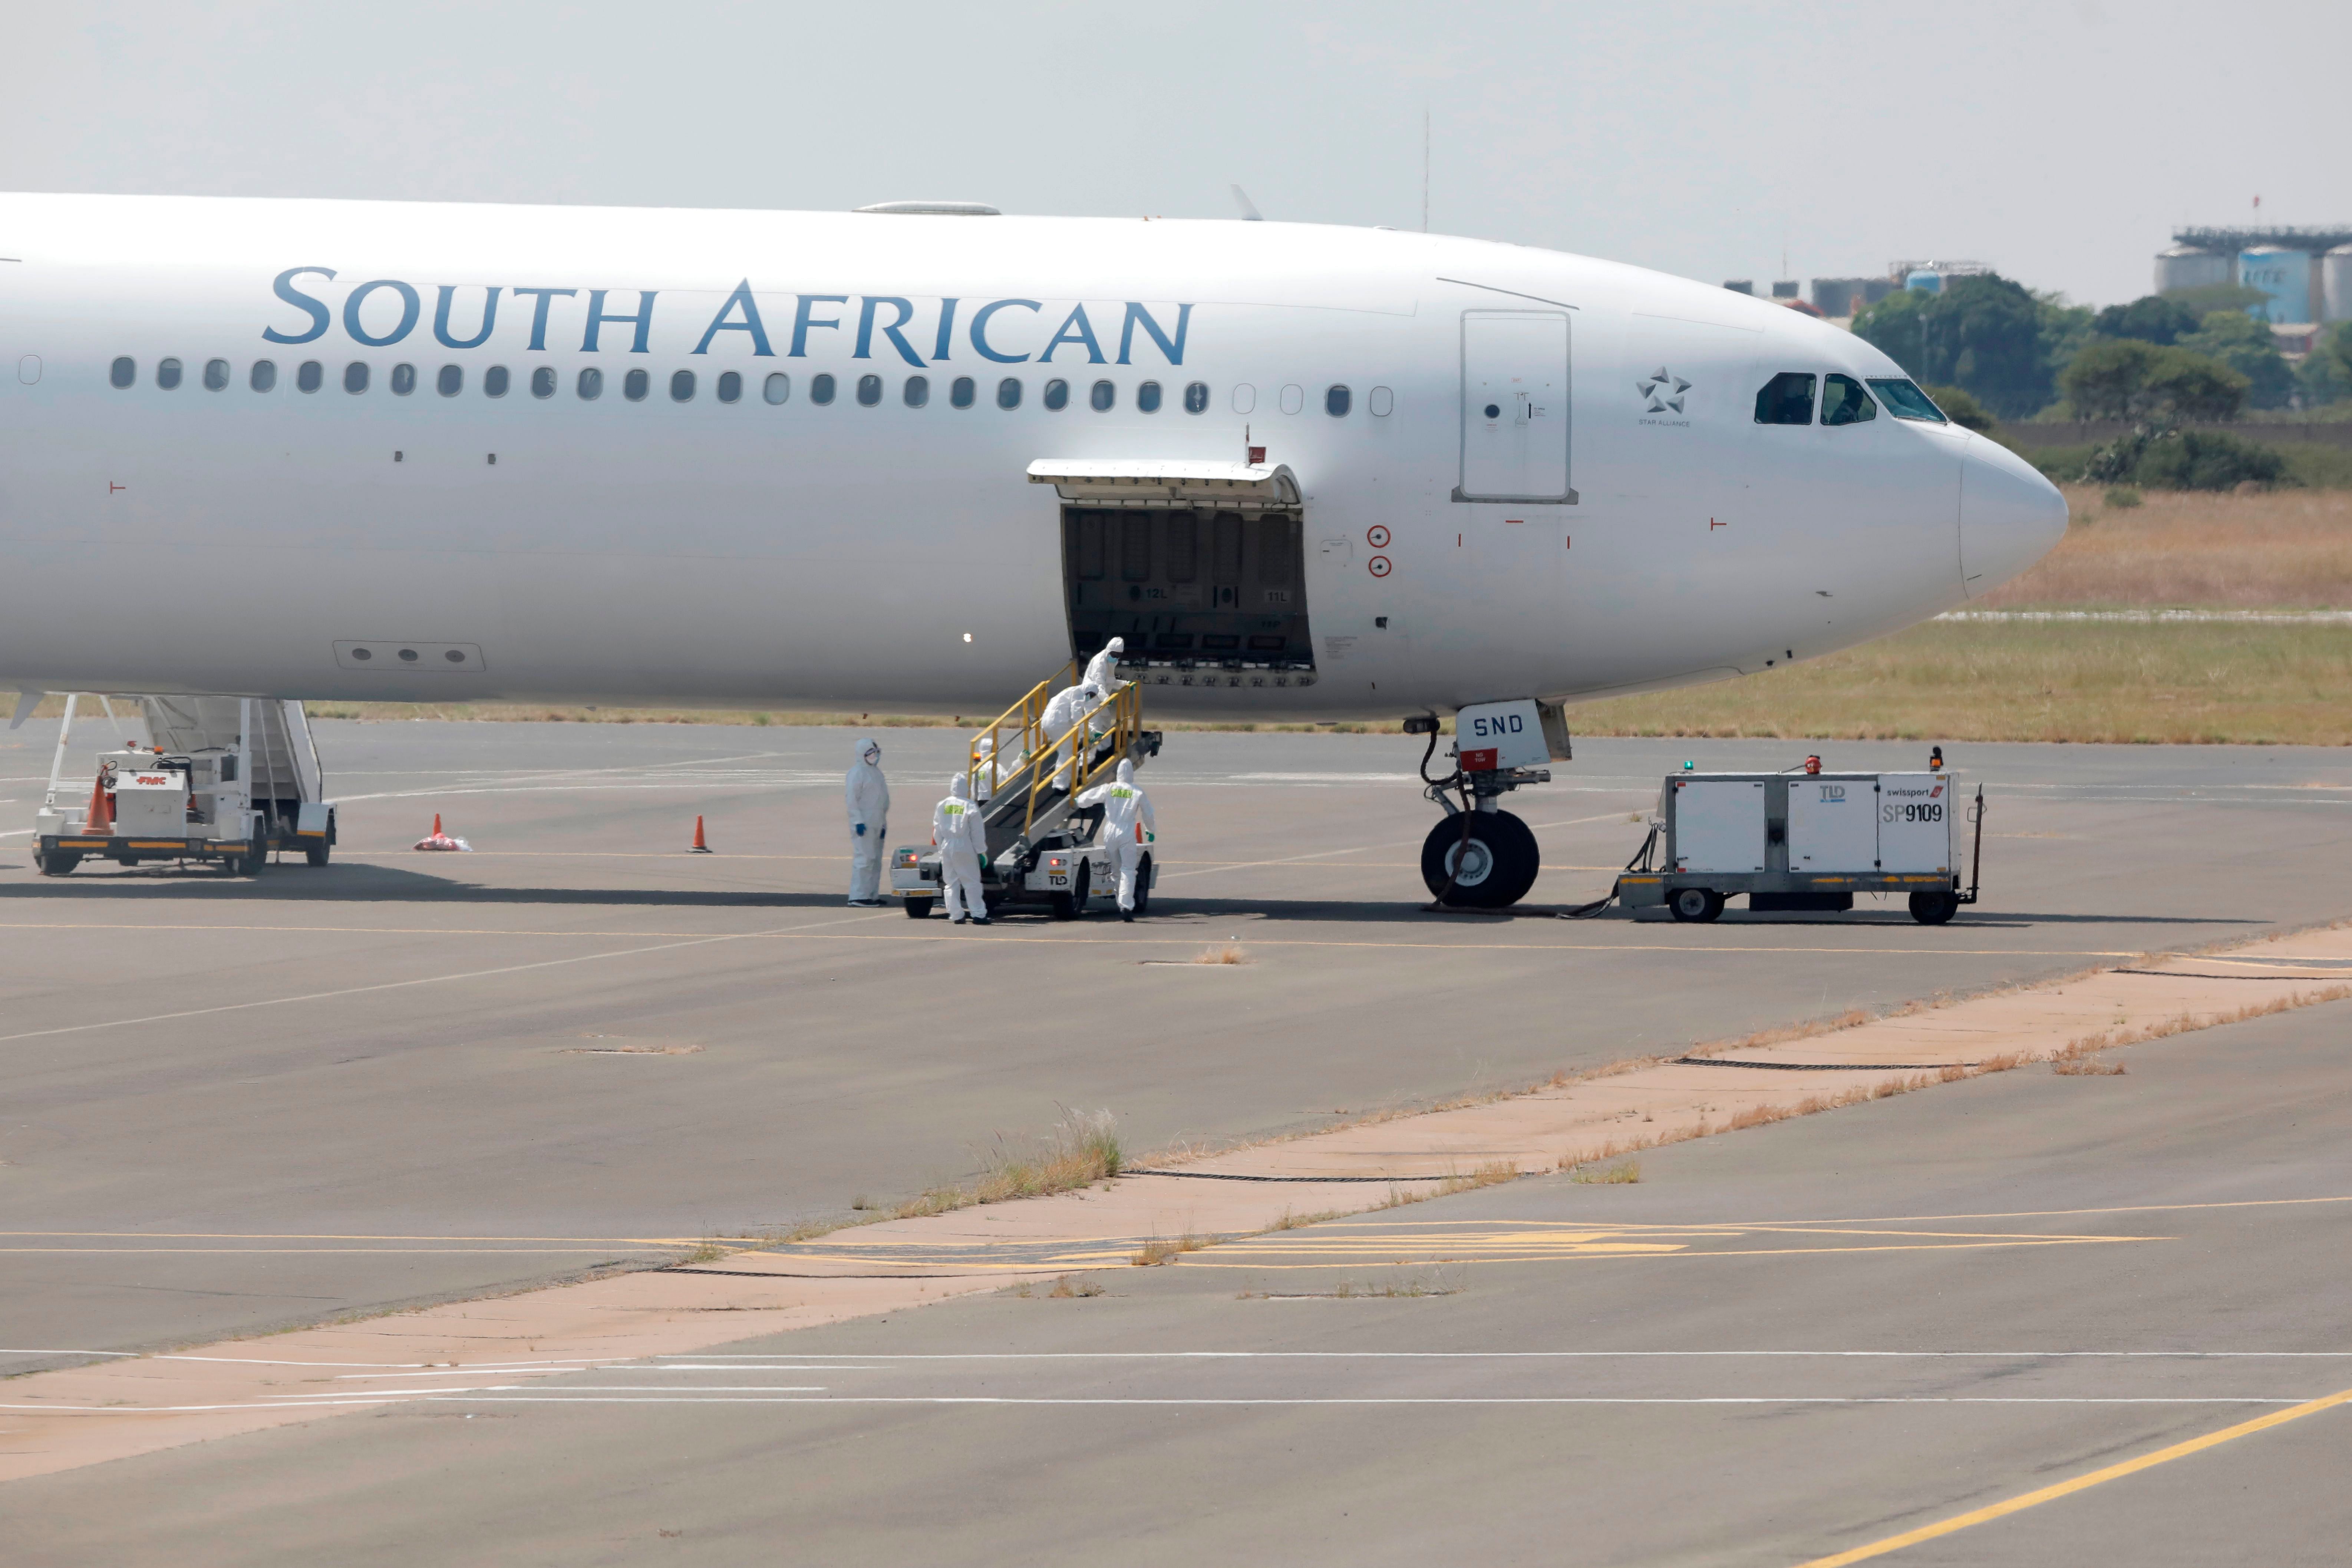 Workers wearing protective suit approach a South African Airways Airbus A340-600 plane on March 14, 2020 as it arrives in Johannesburg, carrying South African citizens who have been repatriated from Wuhan, China.(Credit: AFP Photo)